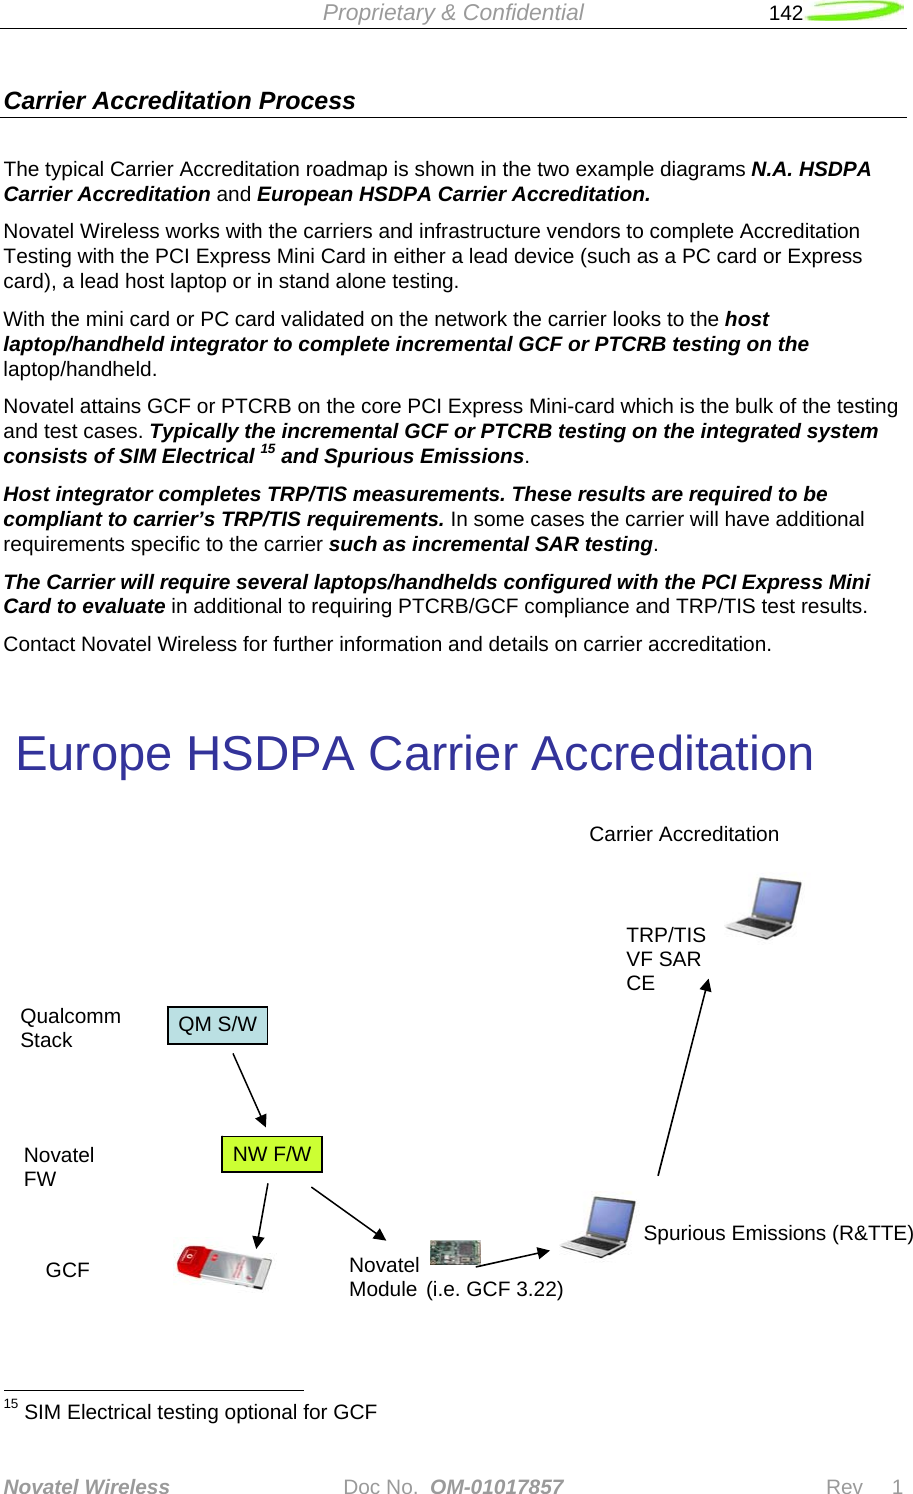  Proprietary &amp; Confidential   142   Novatel Wireless   Doc No.  OM-01017857                              Rev     1  Carrier Accreditation Process The typical Carrier Accreditation roadmap is shown in the two example diagrams N.A. HSDPA Carrier Accreditation and European HSDPA Carrier Accreditation.  Novatel Wireless works with the carriers and infrastructure vendors to complete Accreditation Testing with the PCI Express Mini Card in either a lead device (such as a PC card or Express card), a lead host laptop or in stand alone testing.  With the mini card or PC card validated on the network the carrier looks to the host laptop/handheld integrator to complete incremental GCF or PTCRB testing on the laptop/handheld.  Novatel attains GCF or PTCRB on the core PCI Express Mini-card which is the bulk of the testing and test cases. Typically the incremental GCF or PTCRB testing on the integrated system consists of SIM Electrical 15 and Spurious Emissions. Host integrator completes TRP/TIS measurements. These results are required to be compliant to carrier’s TRP/TIS requirements. In some cases the carrier will have additional requirements specific to the carrier such as incremental SAR testing. The Carrier will require several laptops/handhelds configured with the PCI Express Mini Card to evaluate in additional to requiring PTCRB/GCF compliance and TRP/TIS test results. Contact Novatel Wireless for further information and details on carrier accreditation.                                                           15 SIM Electrical testing optional for GCF  Europe HSDPA Carrier Accreditation  Qualcomm Stack Novatel  FW GCF   (i.e. GCF 3.22)QM S/W  Novatel Module  Carrier Accreditation NW F/W Spurious Emissions (R&amp;TTE)TRP/TIS VF SAR CE 